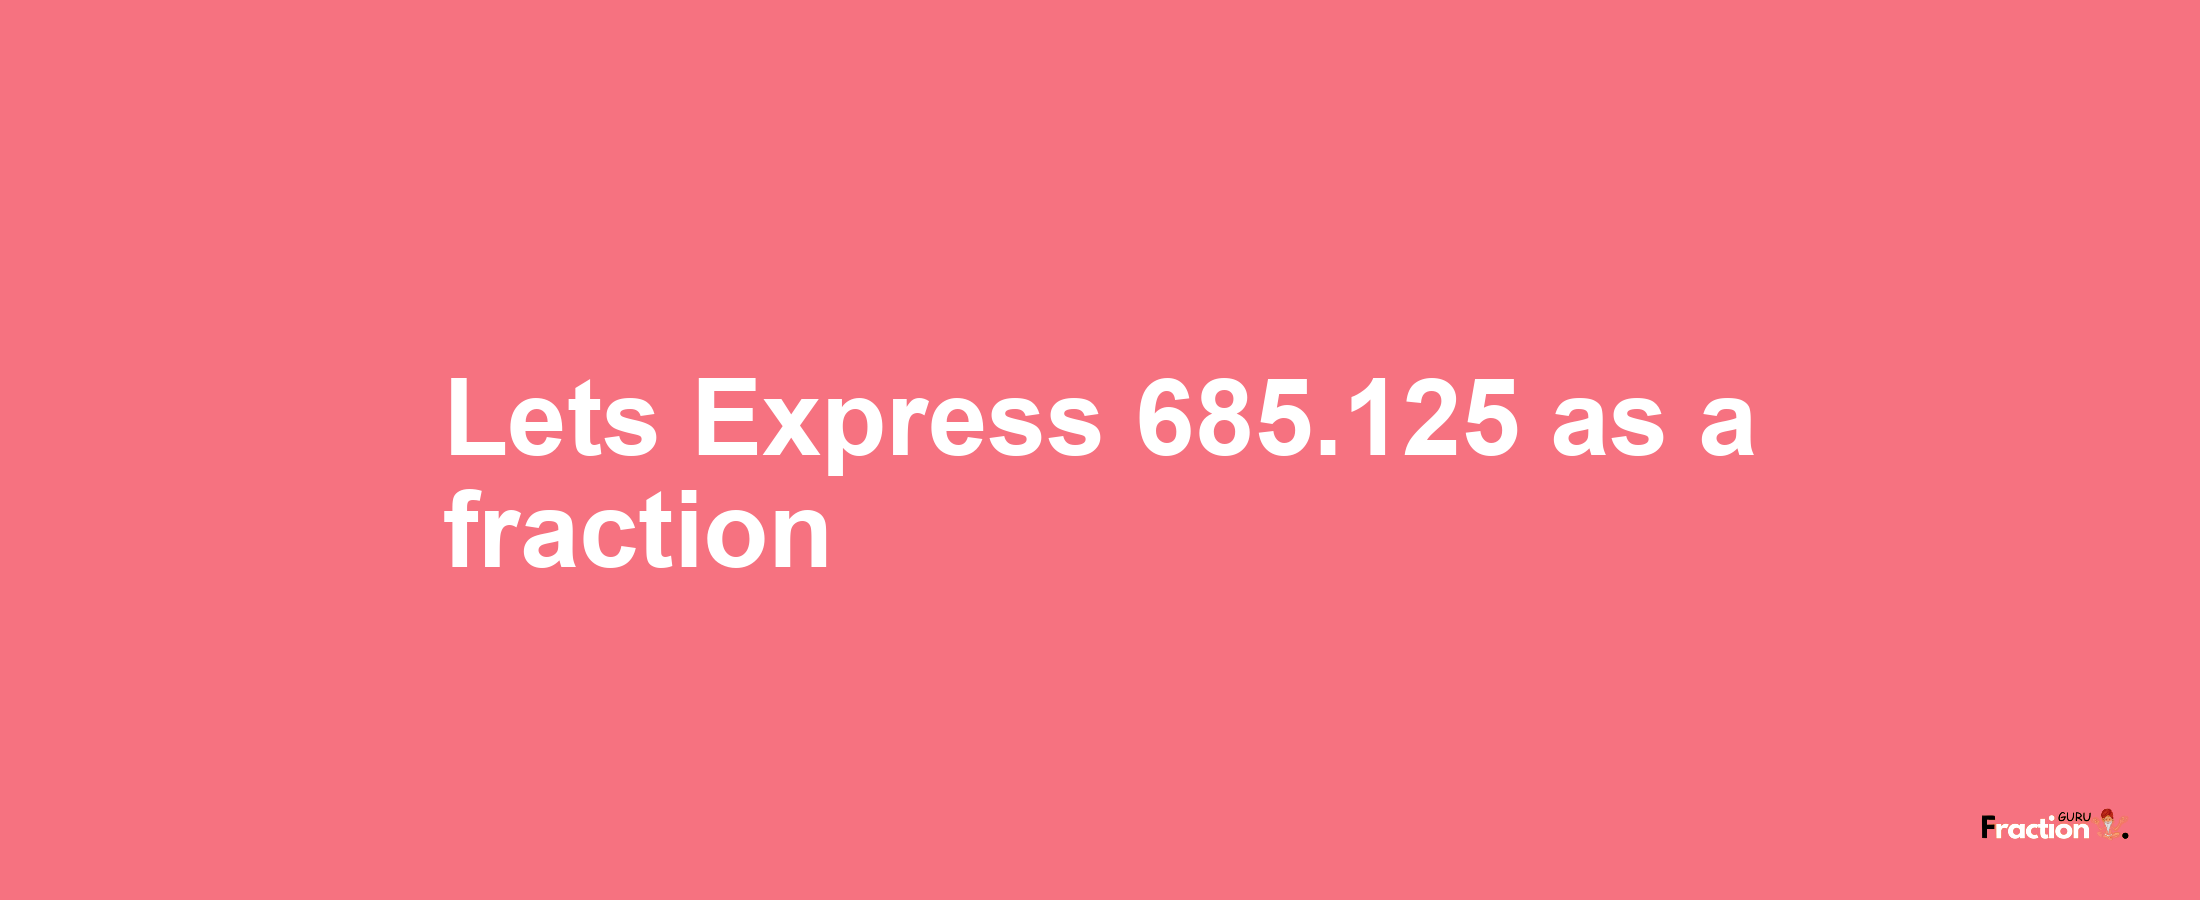 Lets Express 685.125 as afraction